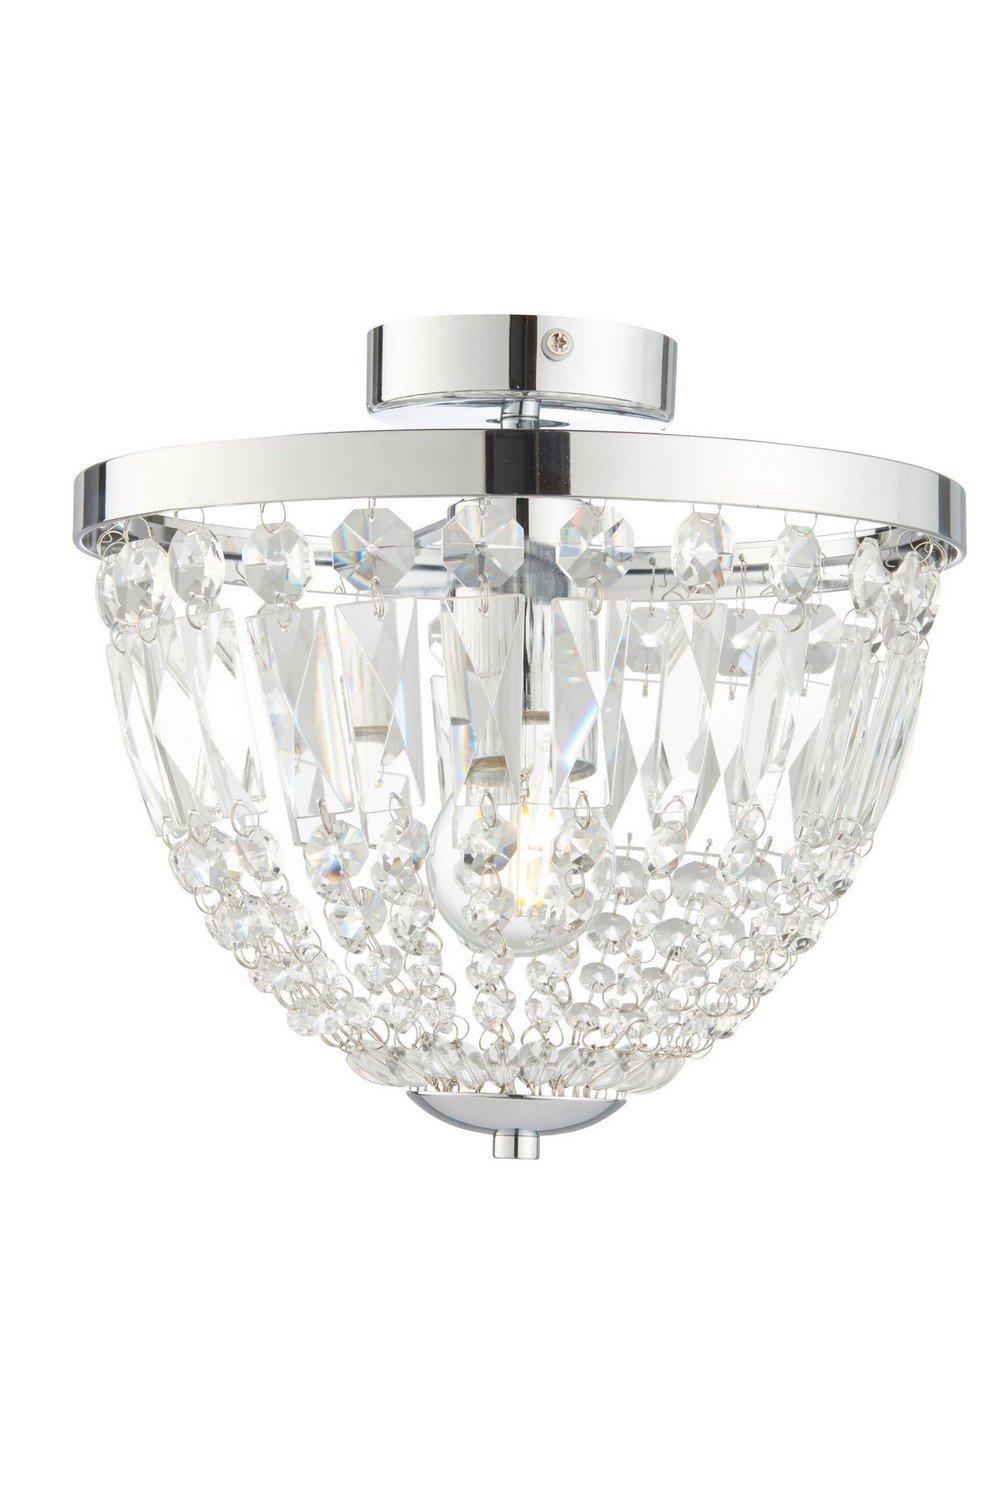 Iona Decorative Bathroom Flush Ceiling Light with Crystal Faceted Droplets IP44